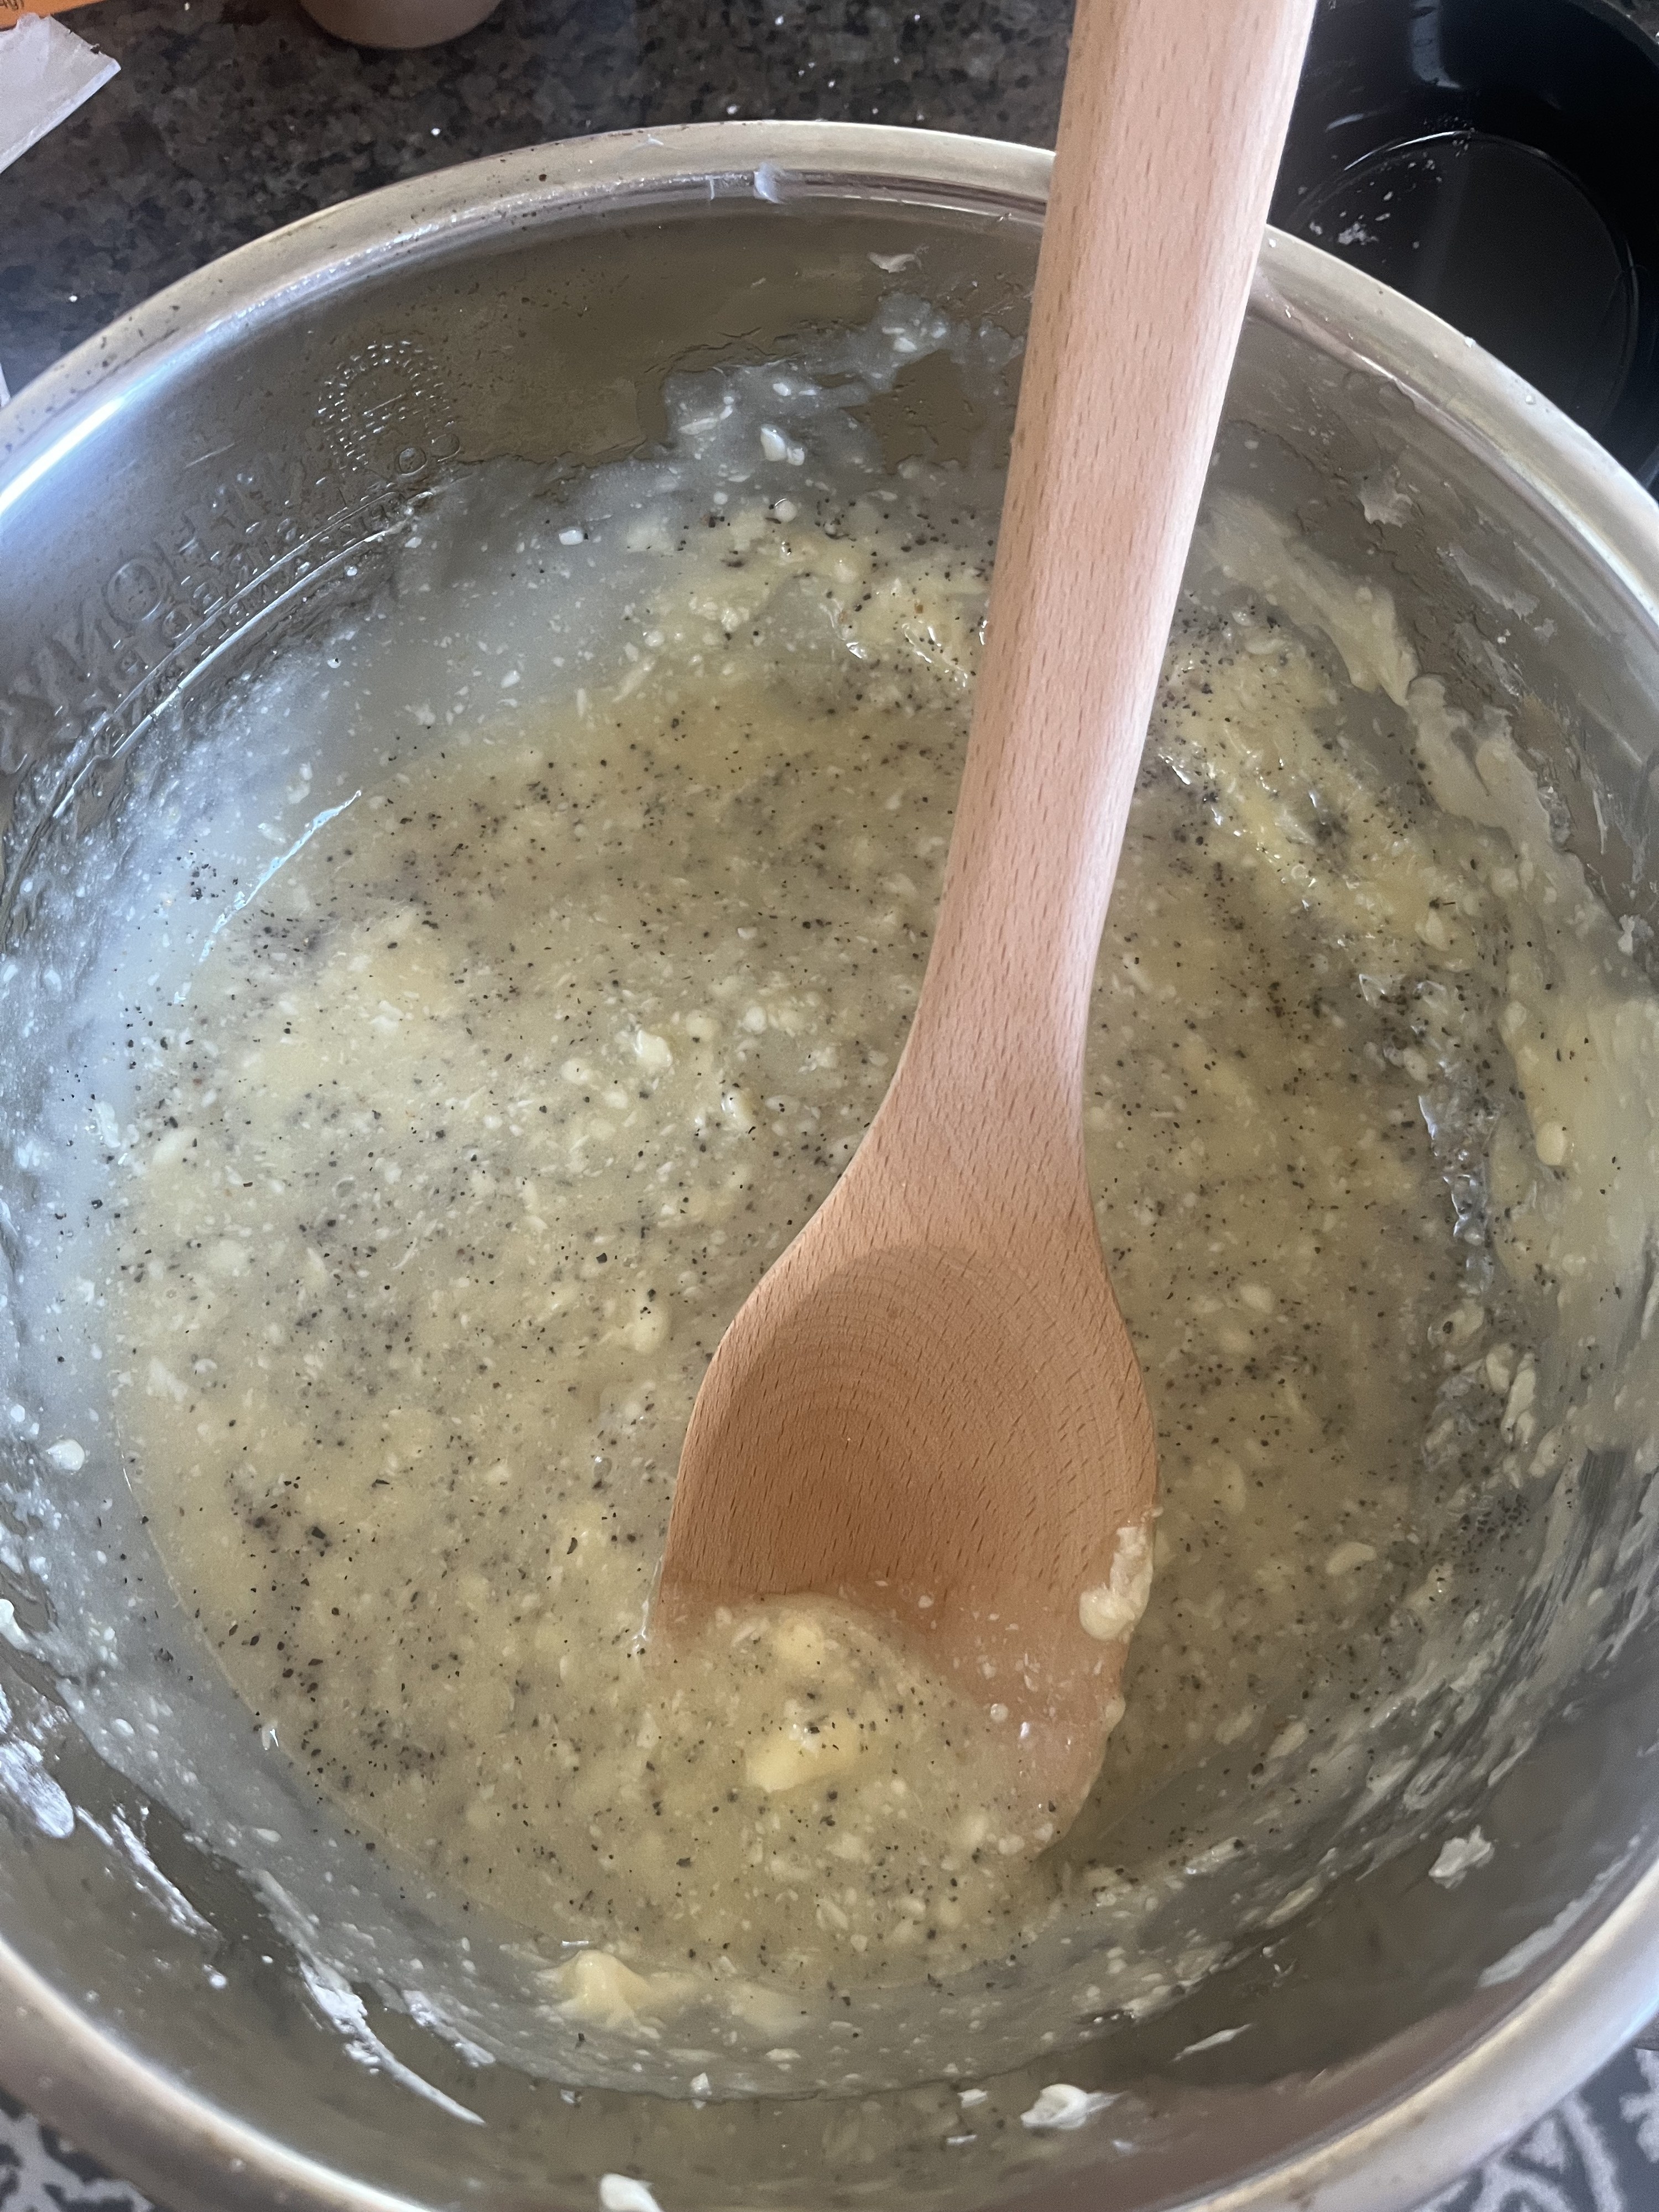 the chai mixed into the batter